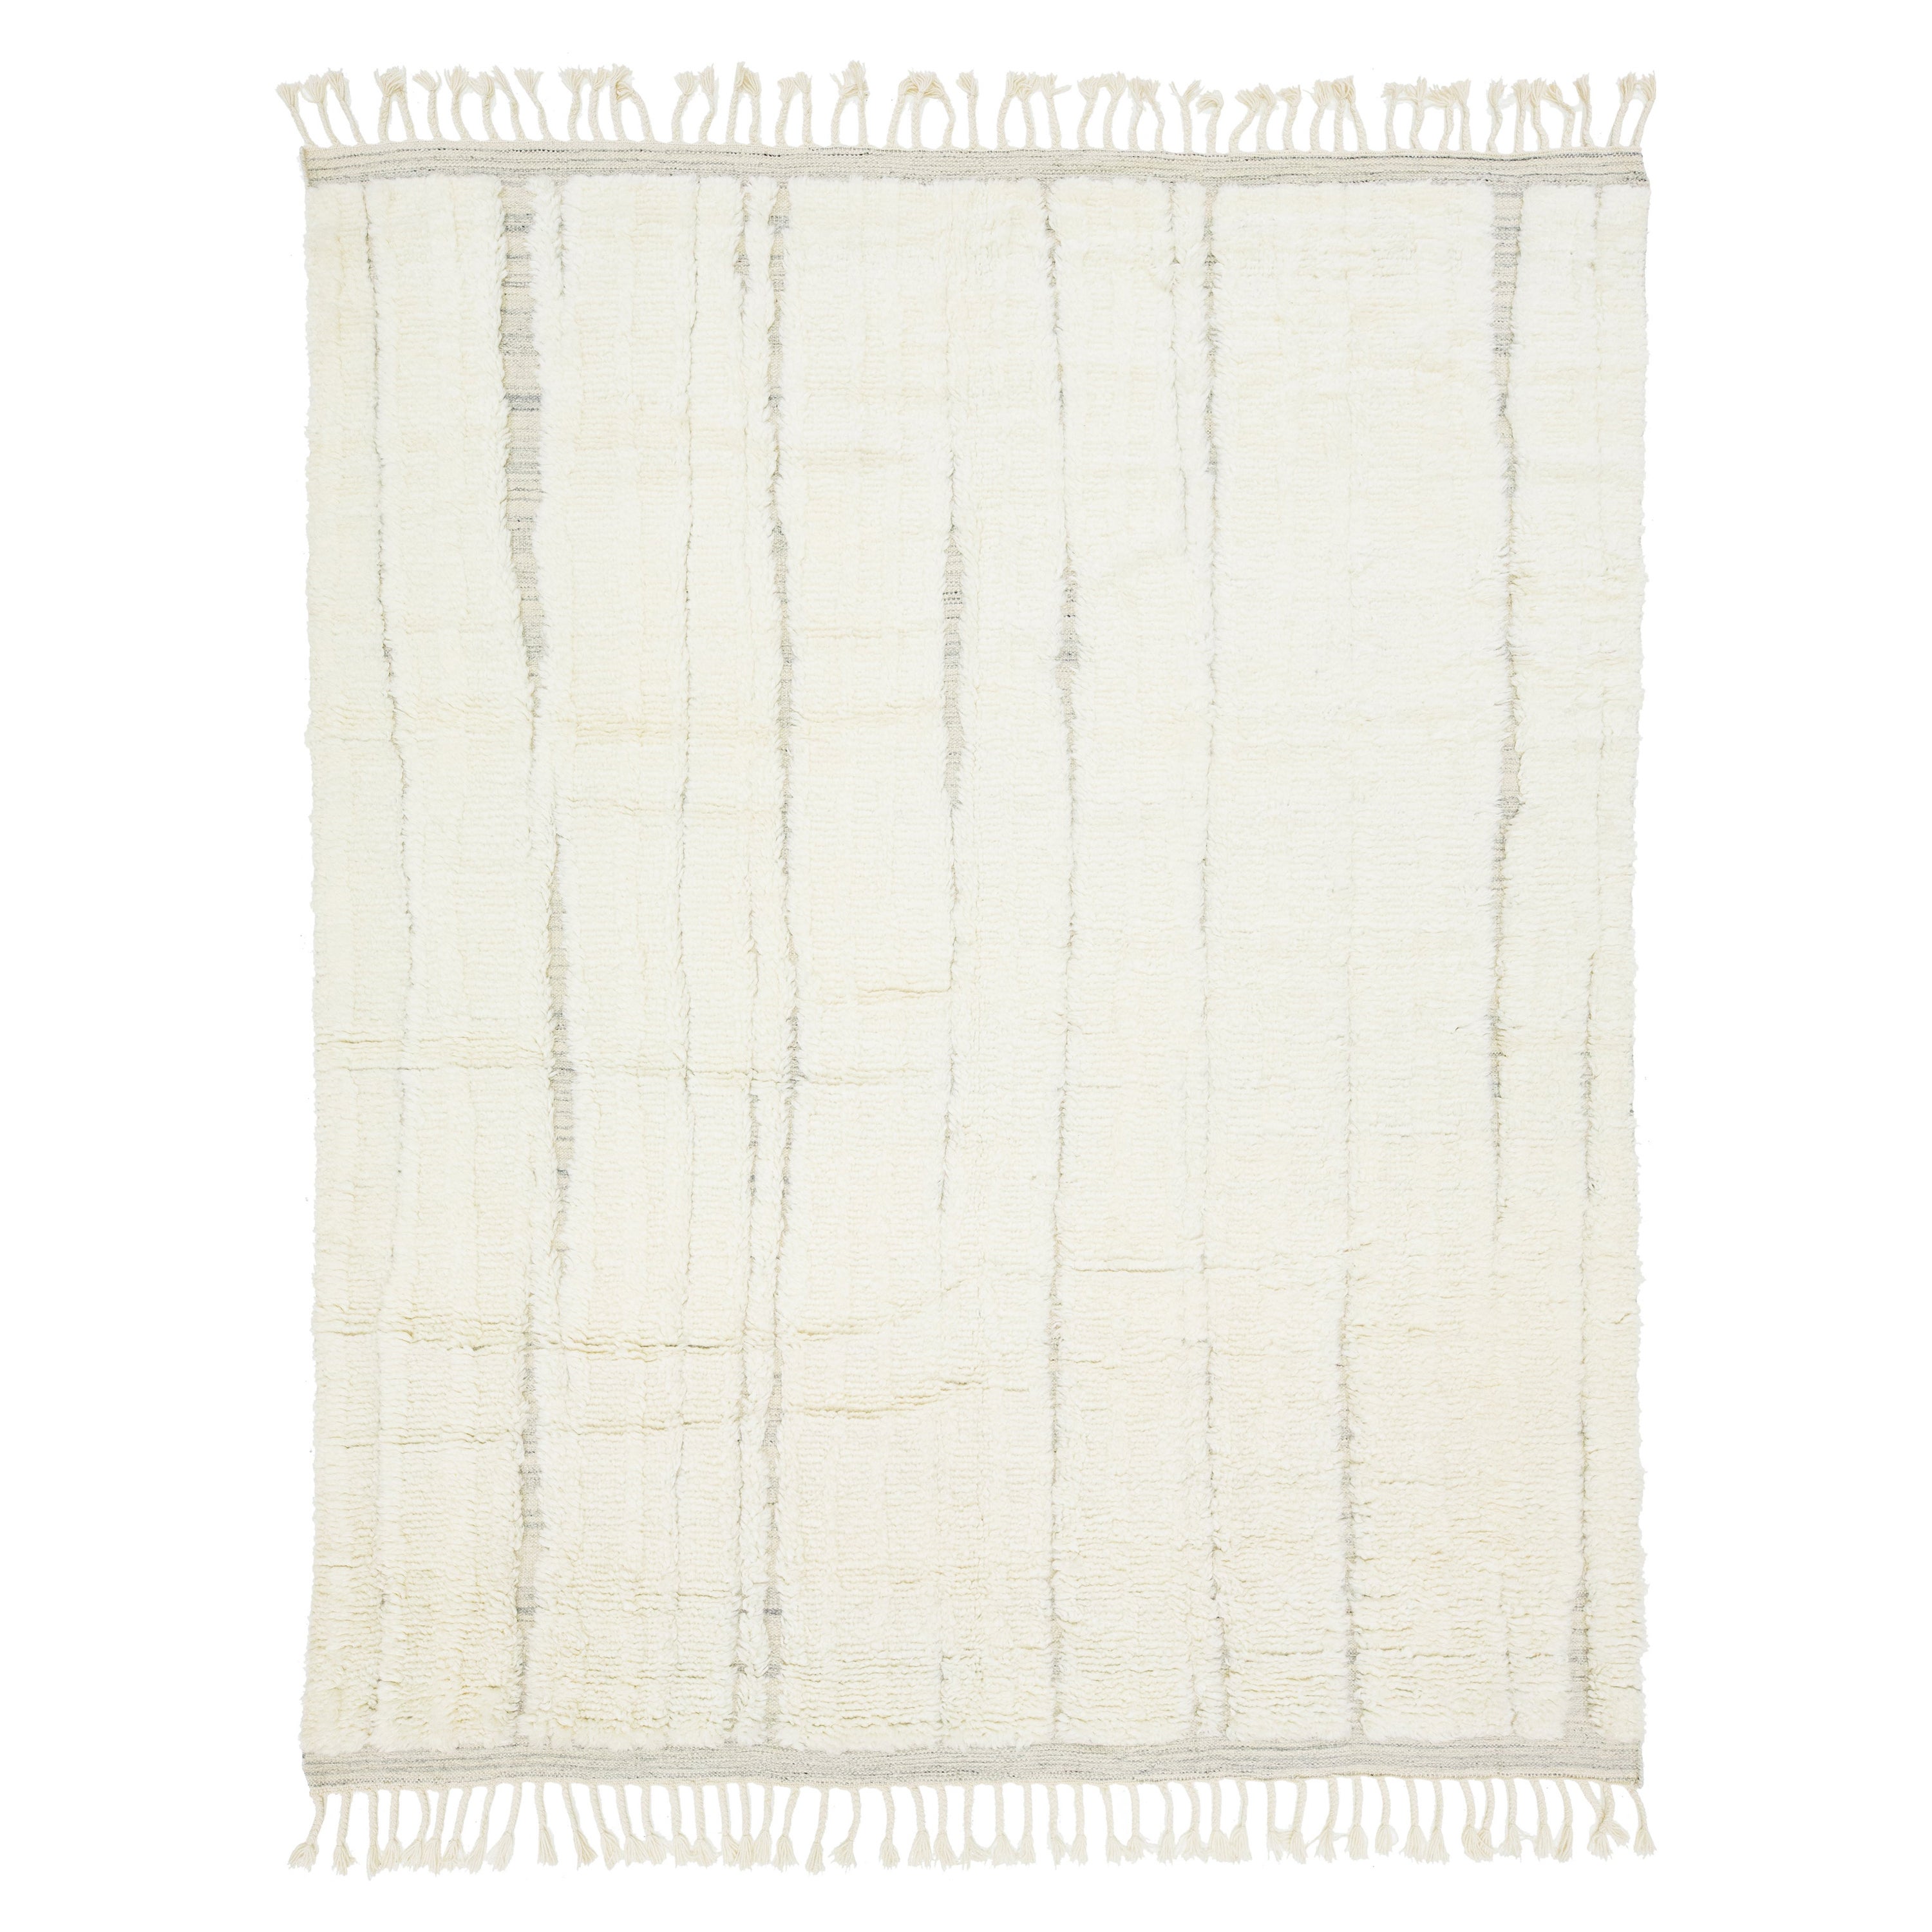 Contemporary Natural Handmade Moroccan-Style Wool Rug In Ivory by Apadana For Sale